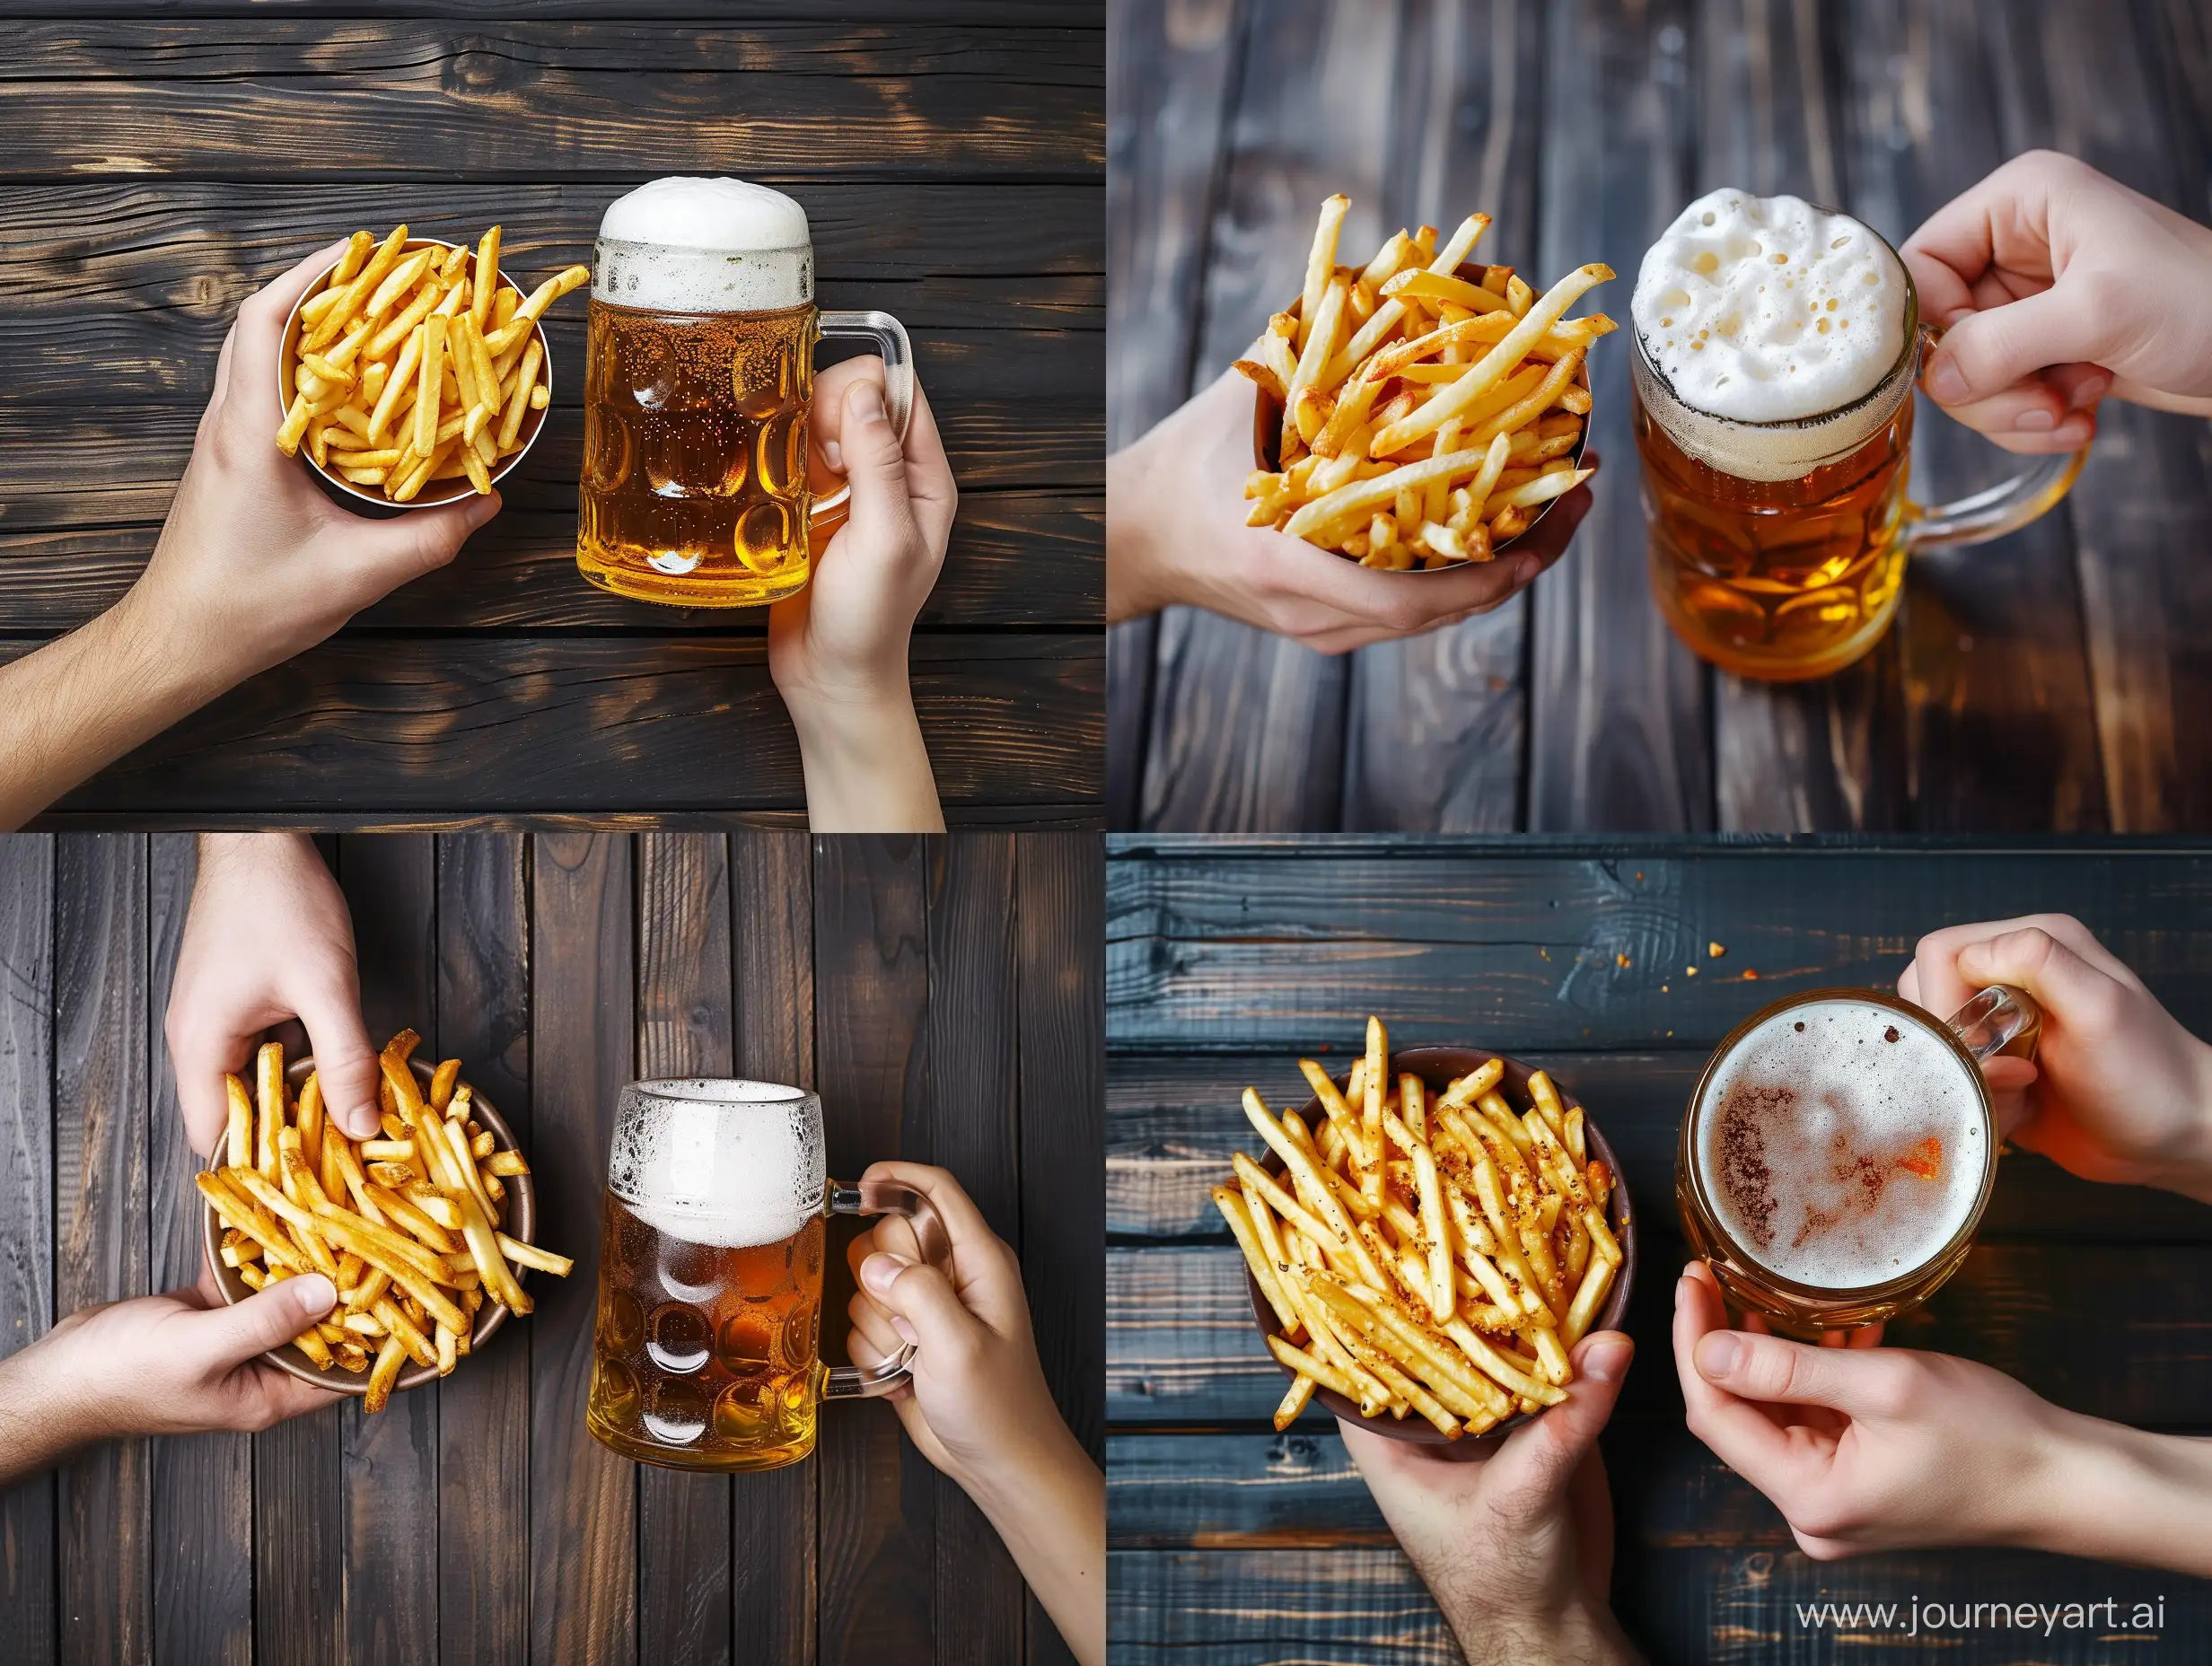 Person-Holding-French-Fries-and-Beer-Mug-on-Dark-Wooden-Background